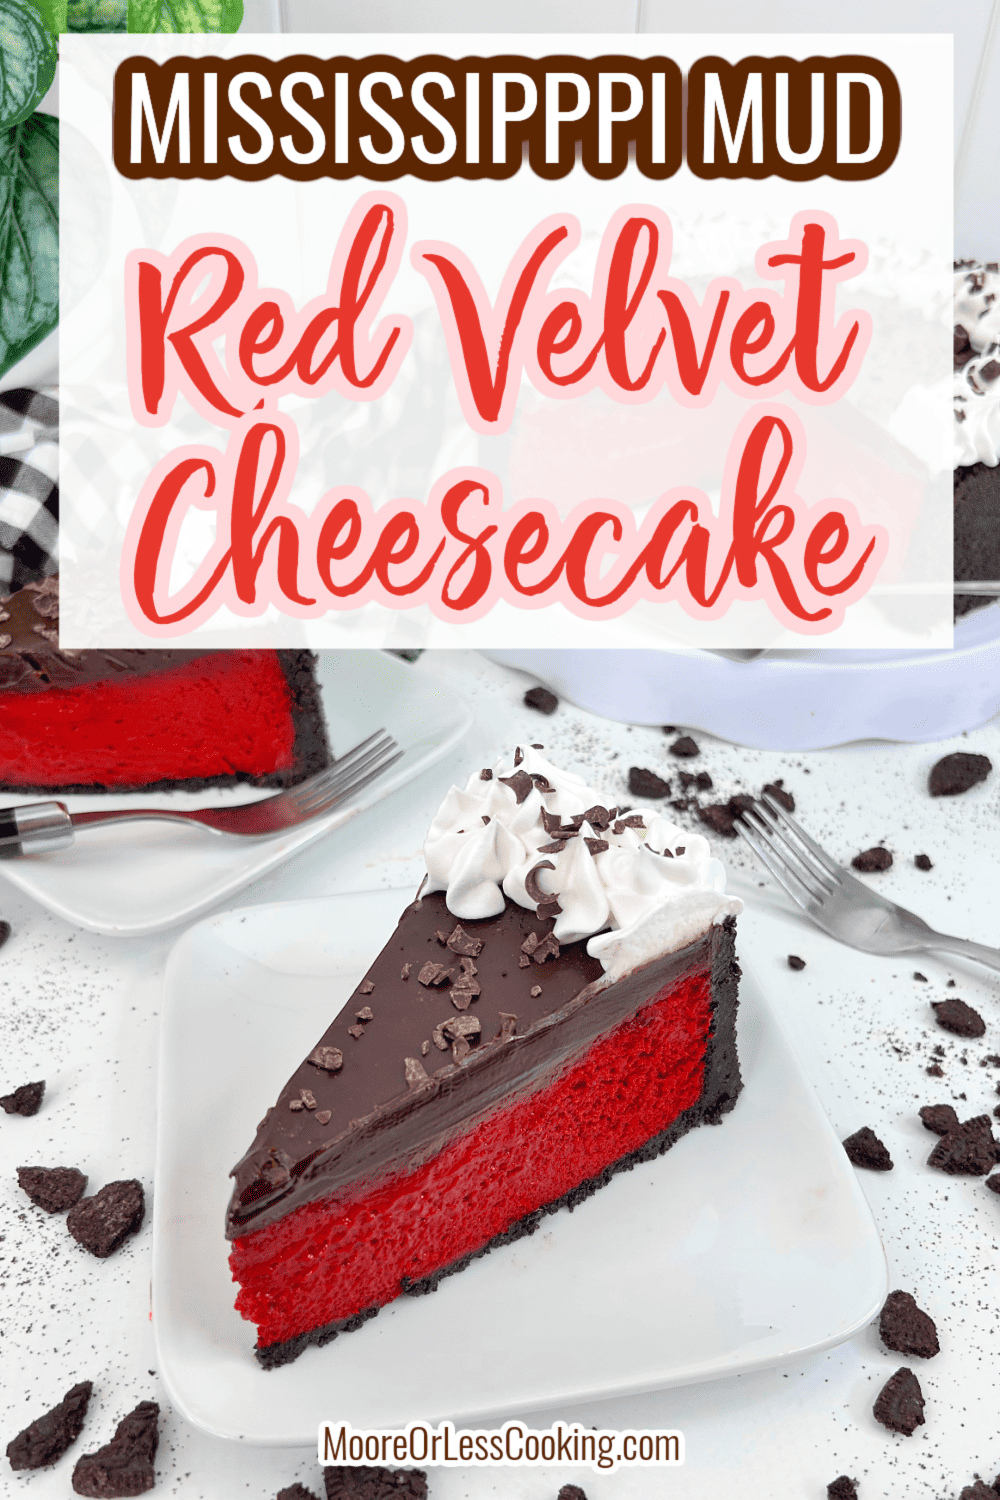 If you love cheesecake, chocolate and red velvet, this is the perfect sweet treat that will let you enjoy all three of those ingredients! via @Mooreorlesscook